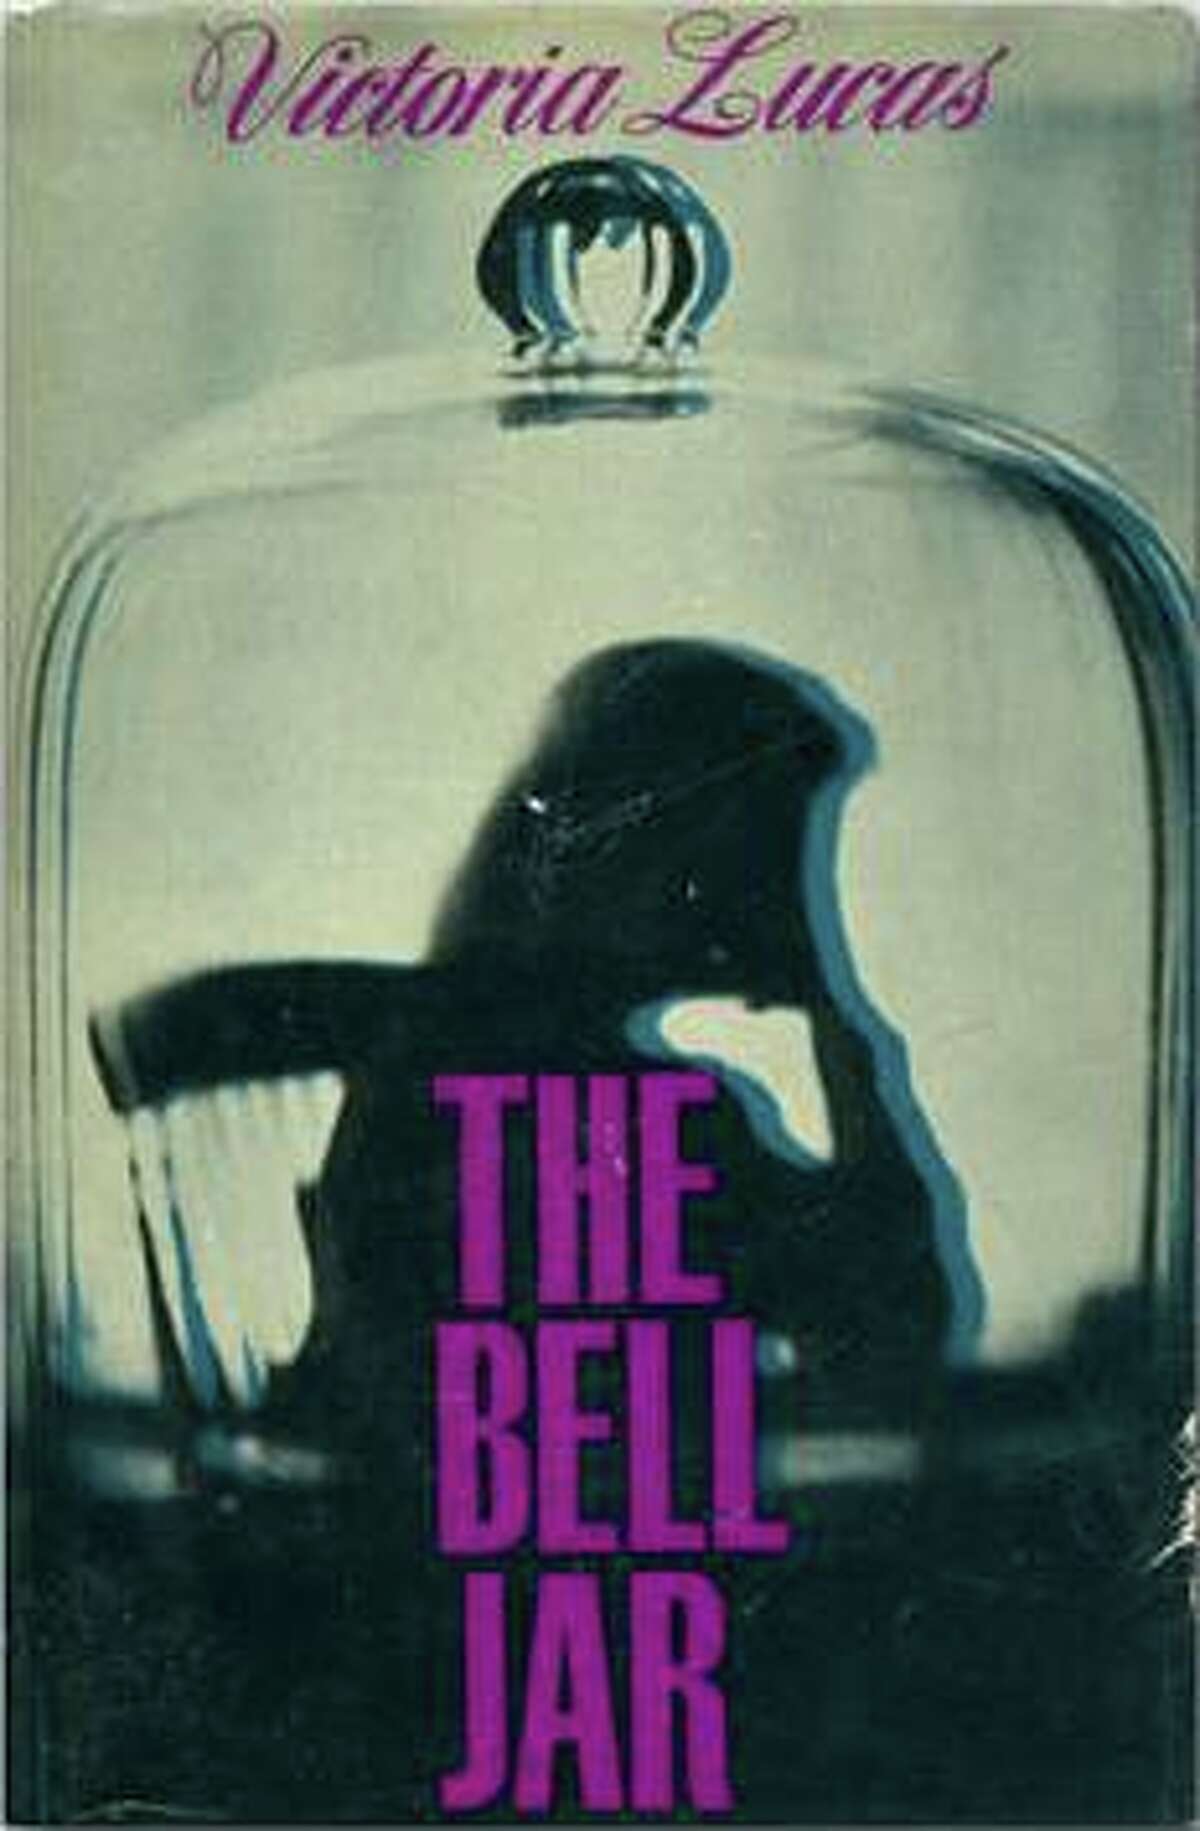 "The Bell Jar," Plath's largely autobiographical novel, describes the mental breakdown of Esther Greenwood, a promising young writer who tries to commit suicide. Plath first published the novel under a pseudonym, Victoria Lucas.